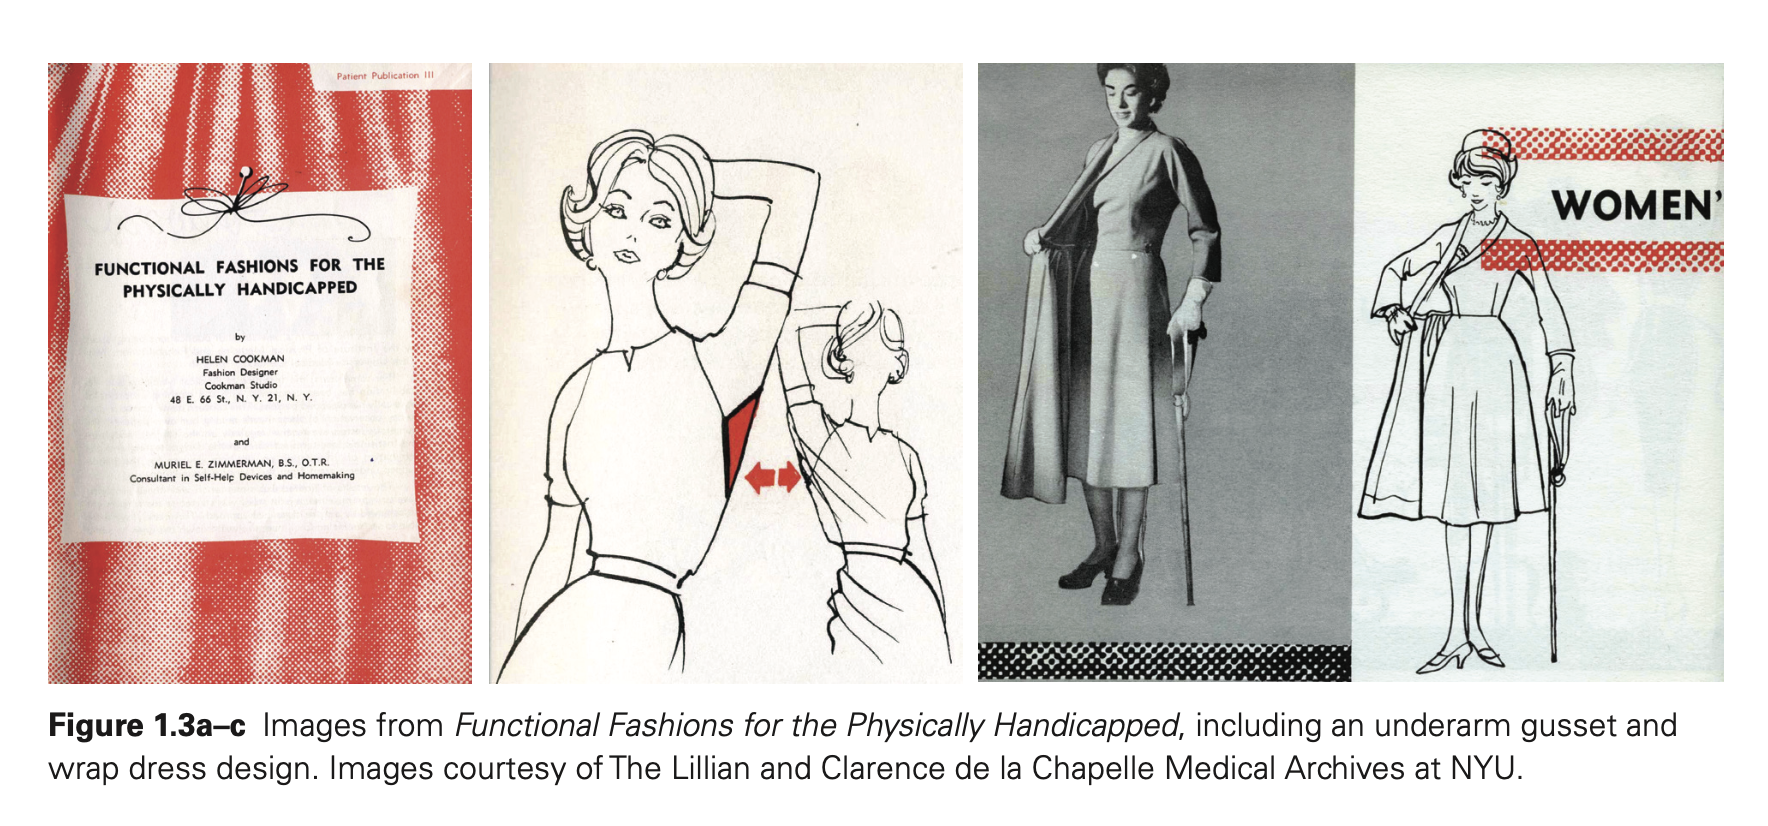 Four images from a dress pattern in the 1960s, part of "Functional Fashion for the Handicapped," here featuring a wrap dress for a woman using a cane.